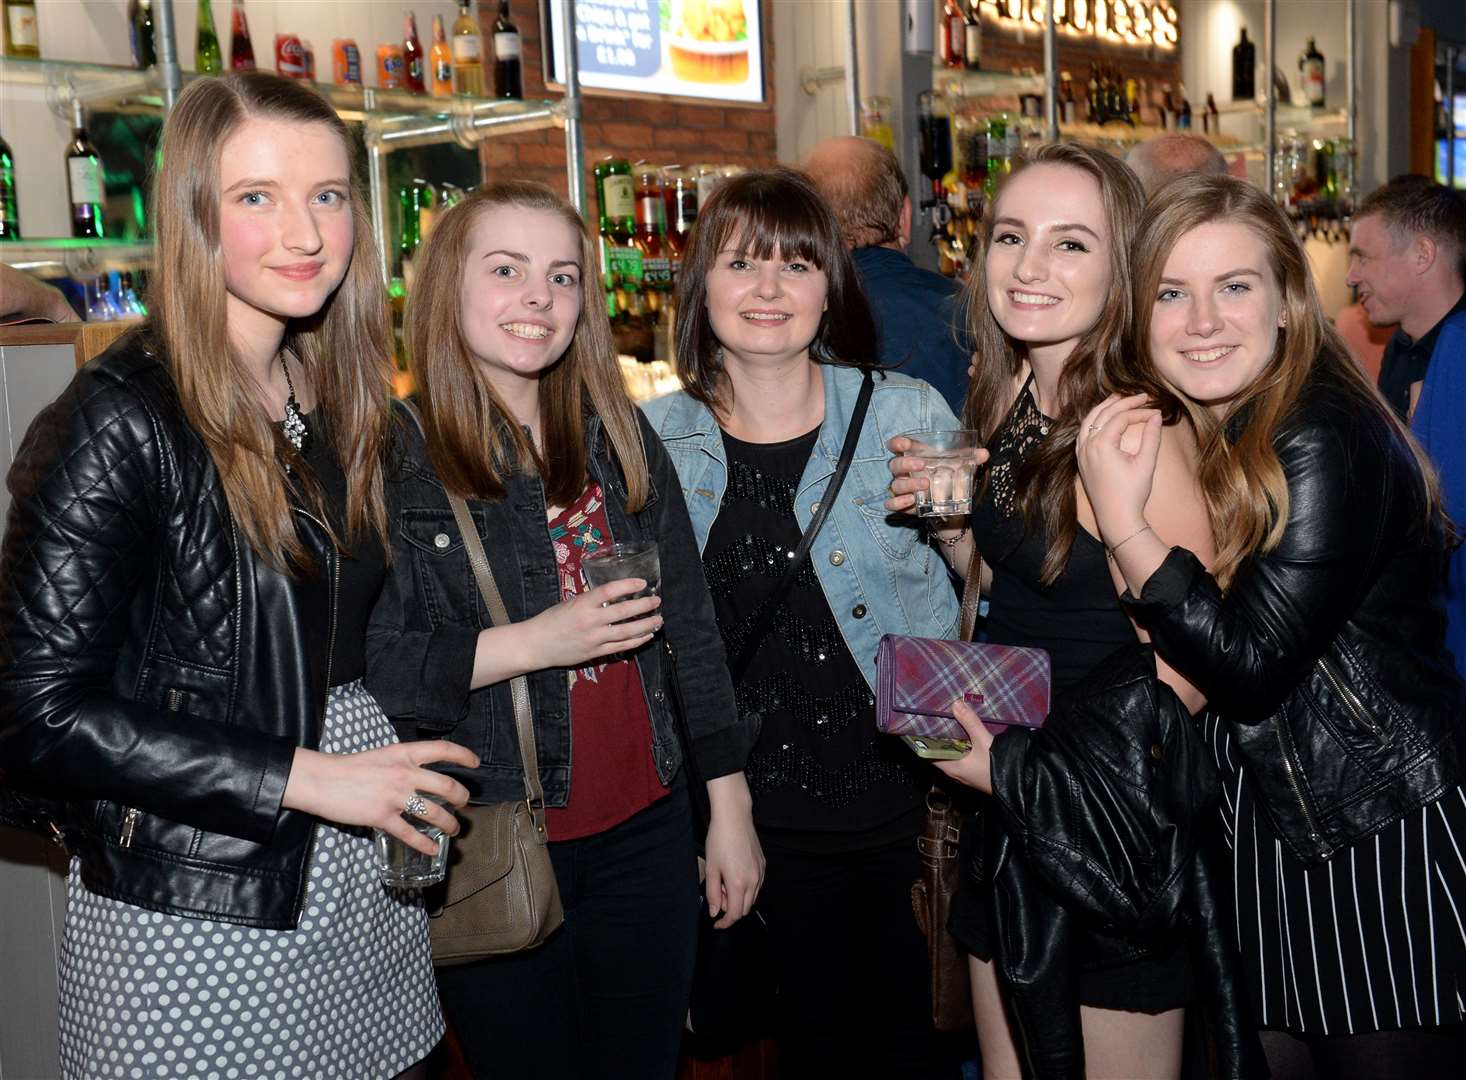 Staff night out for the ladies of Anta. Picture: Gary Anthony. Image No.034610.